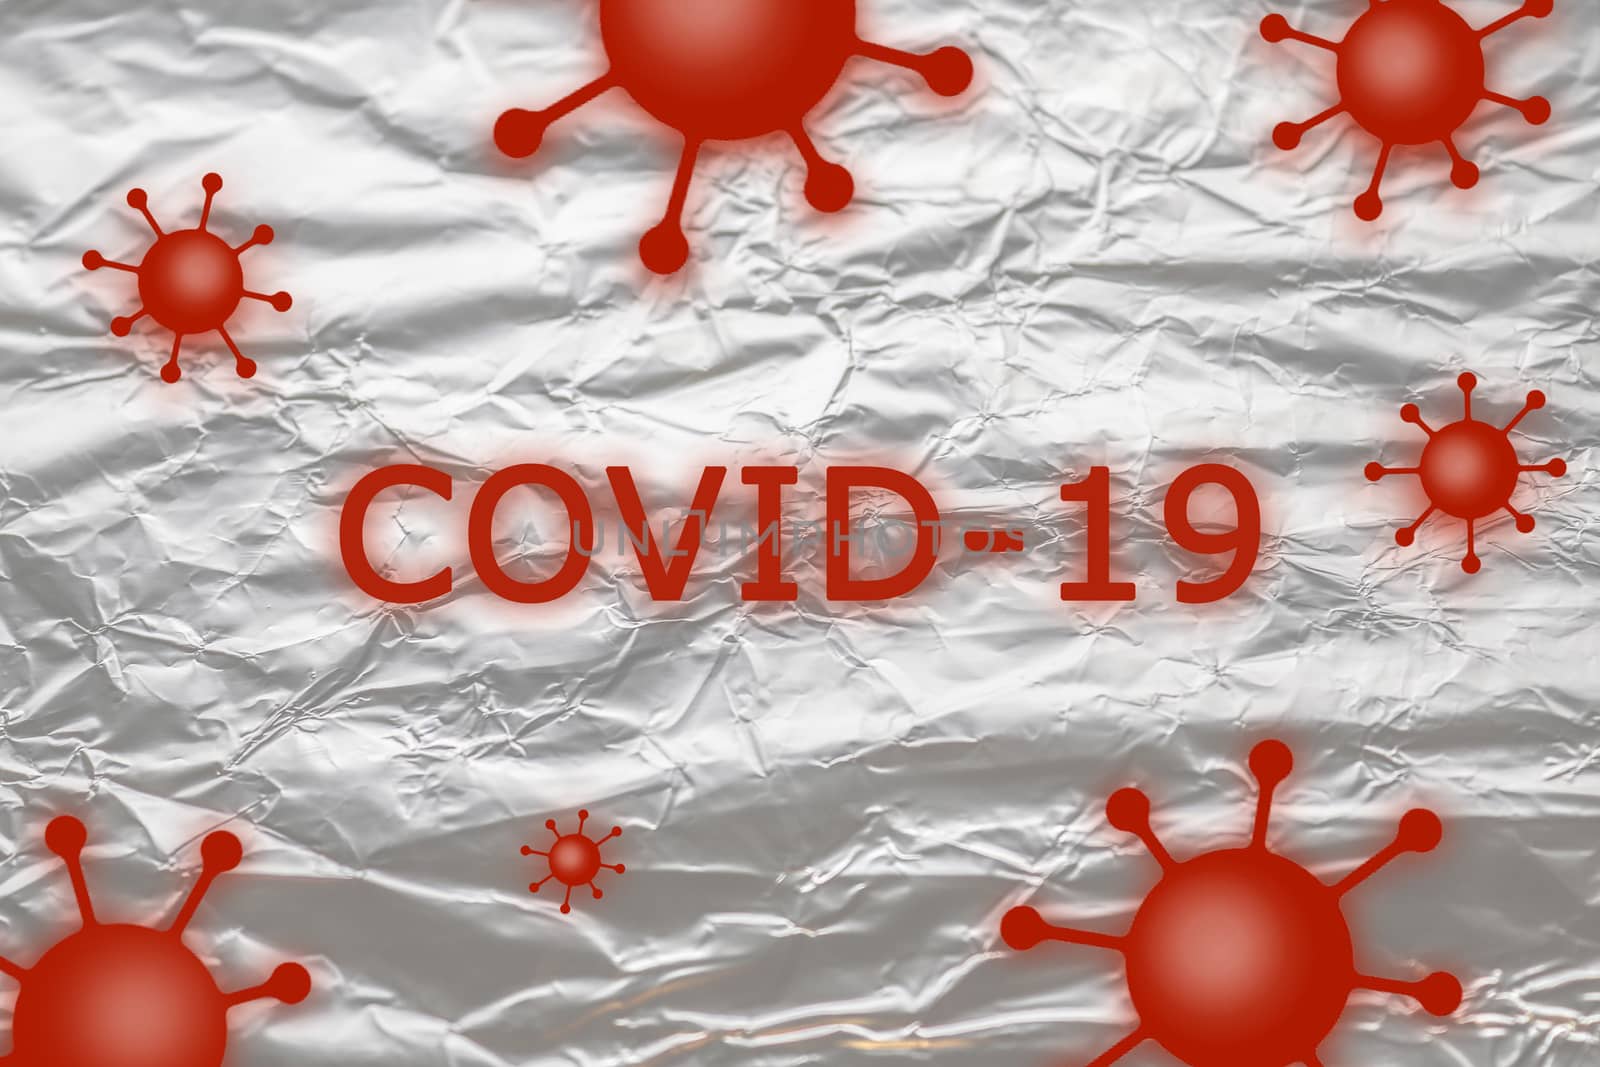 3D-Illustration of COVID-19 and coronavirus texts on a white bac by MP_foto71